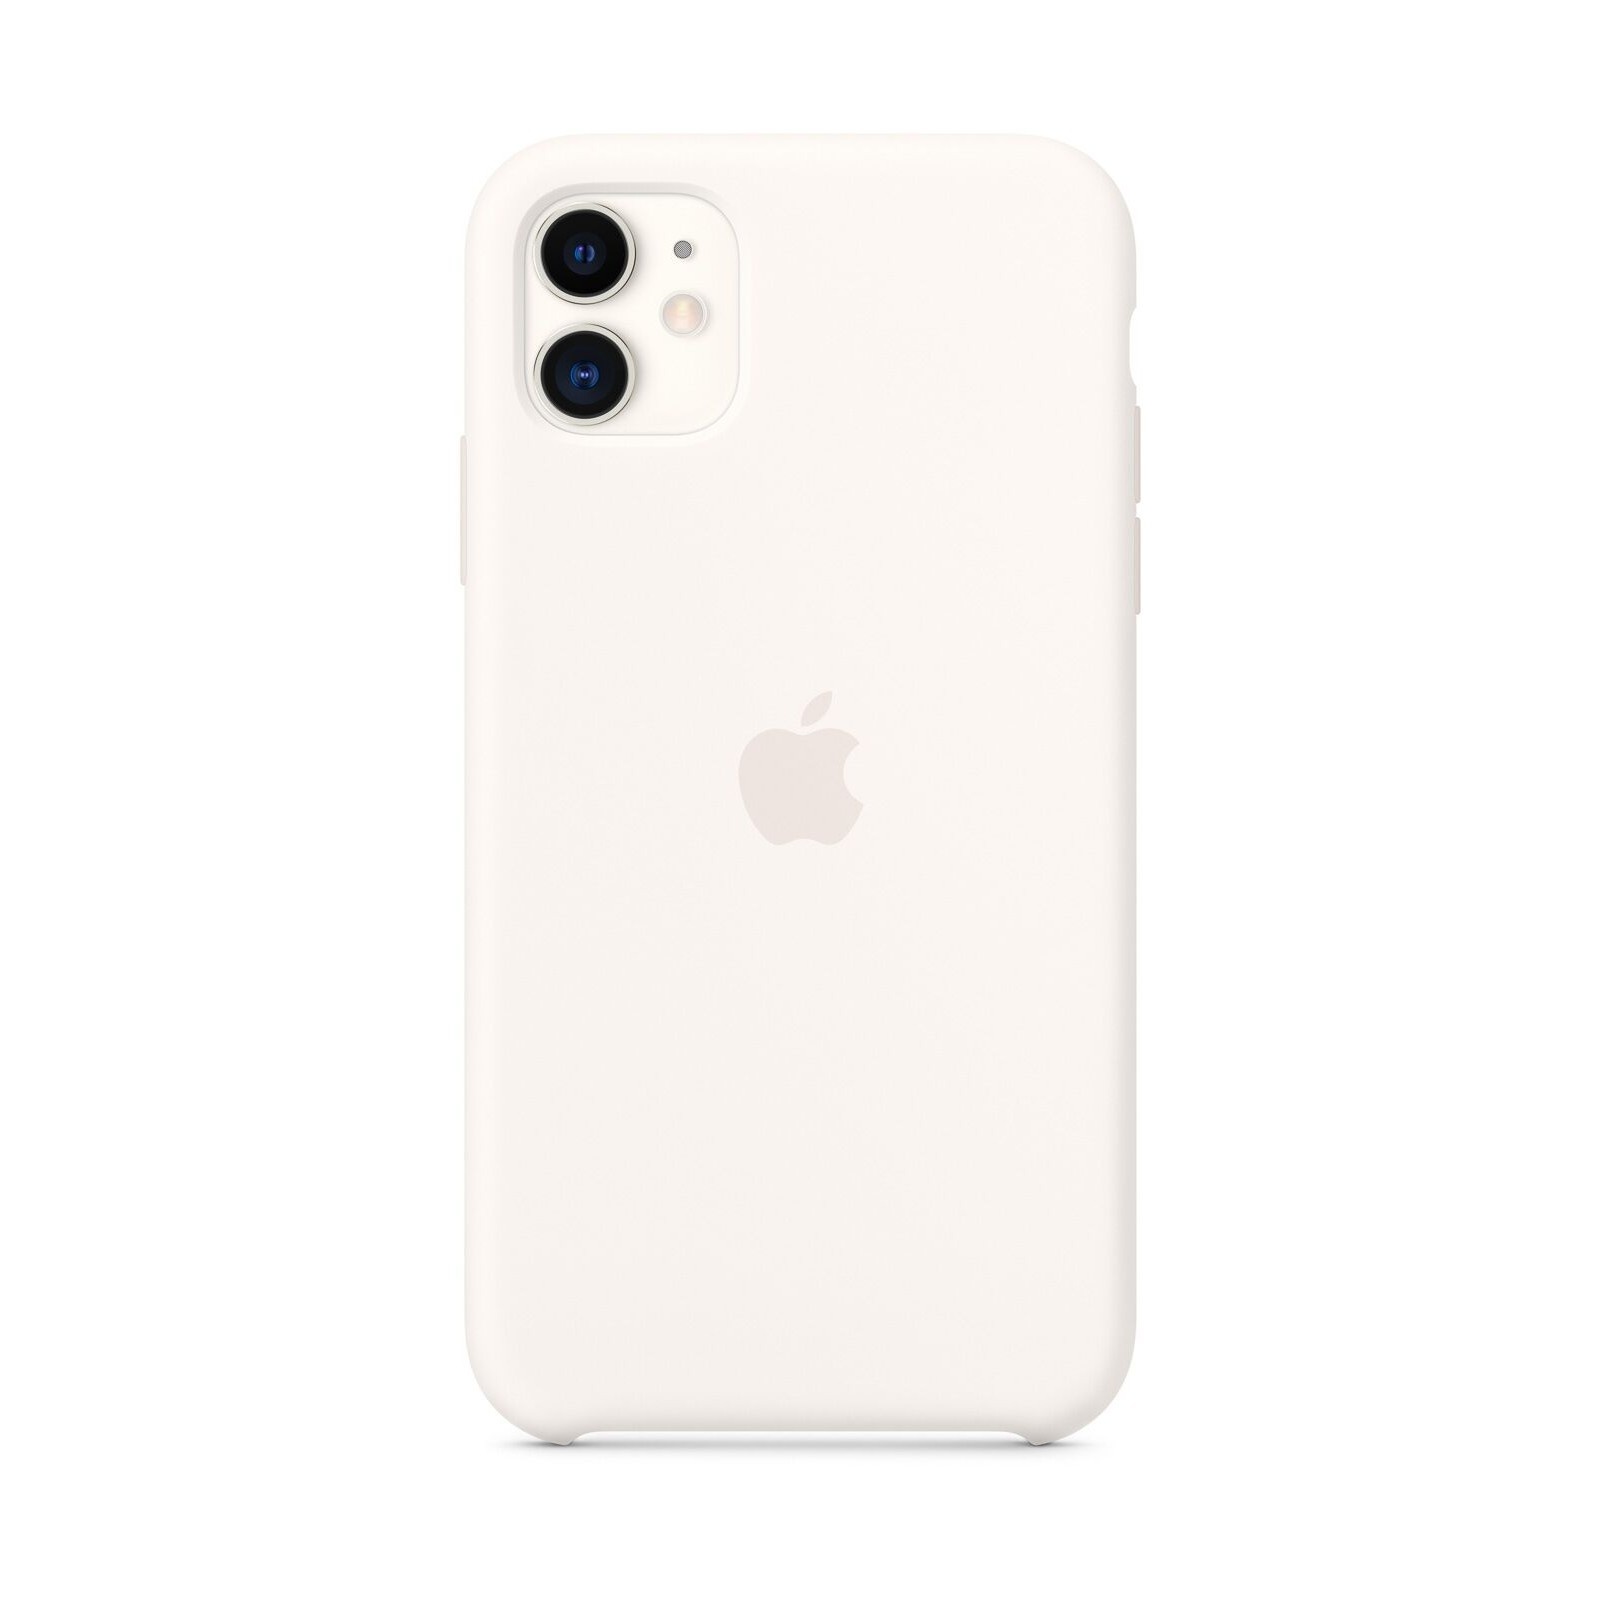 APPLE IPHONE 11 SILICONE CASE - WHITE - 12th Man Technology